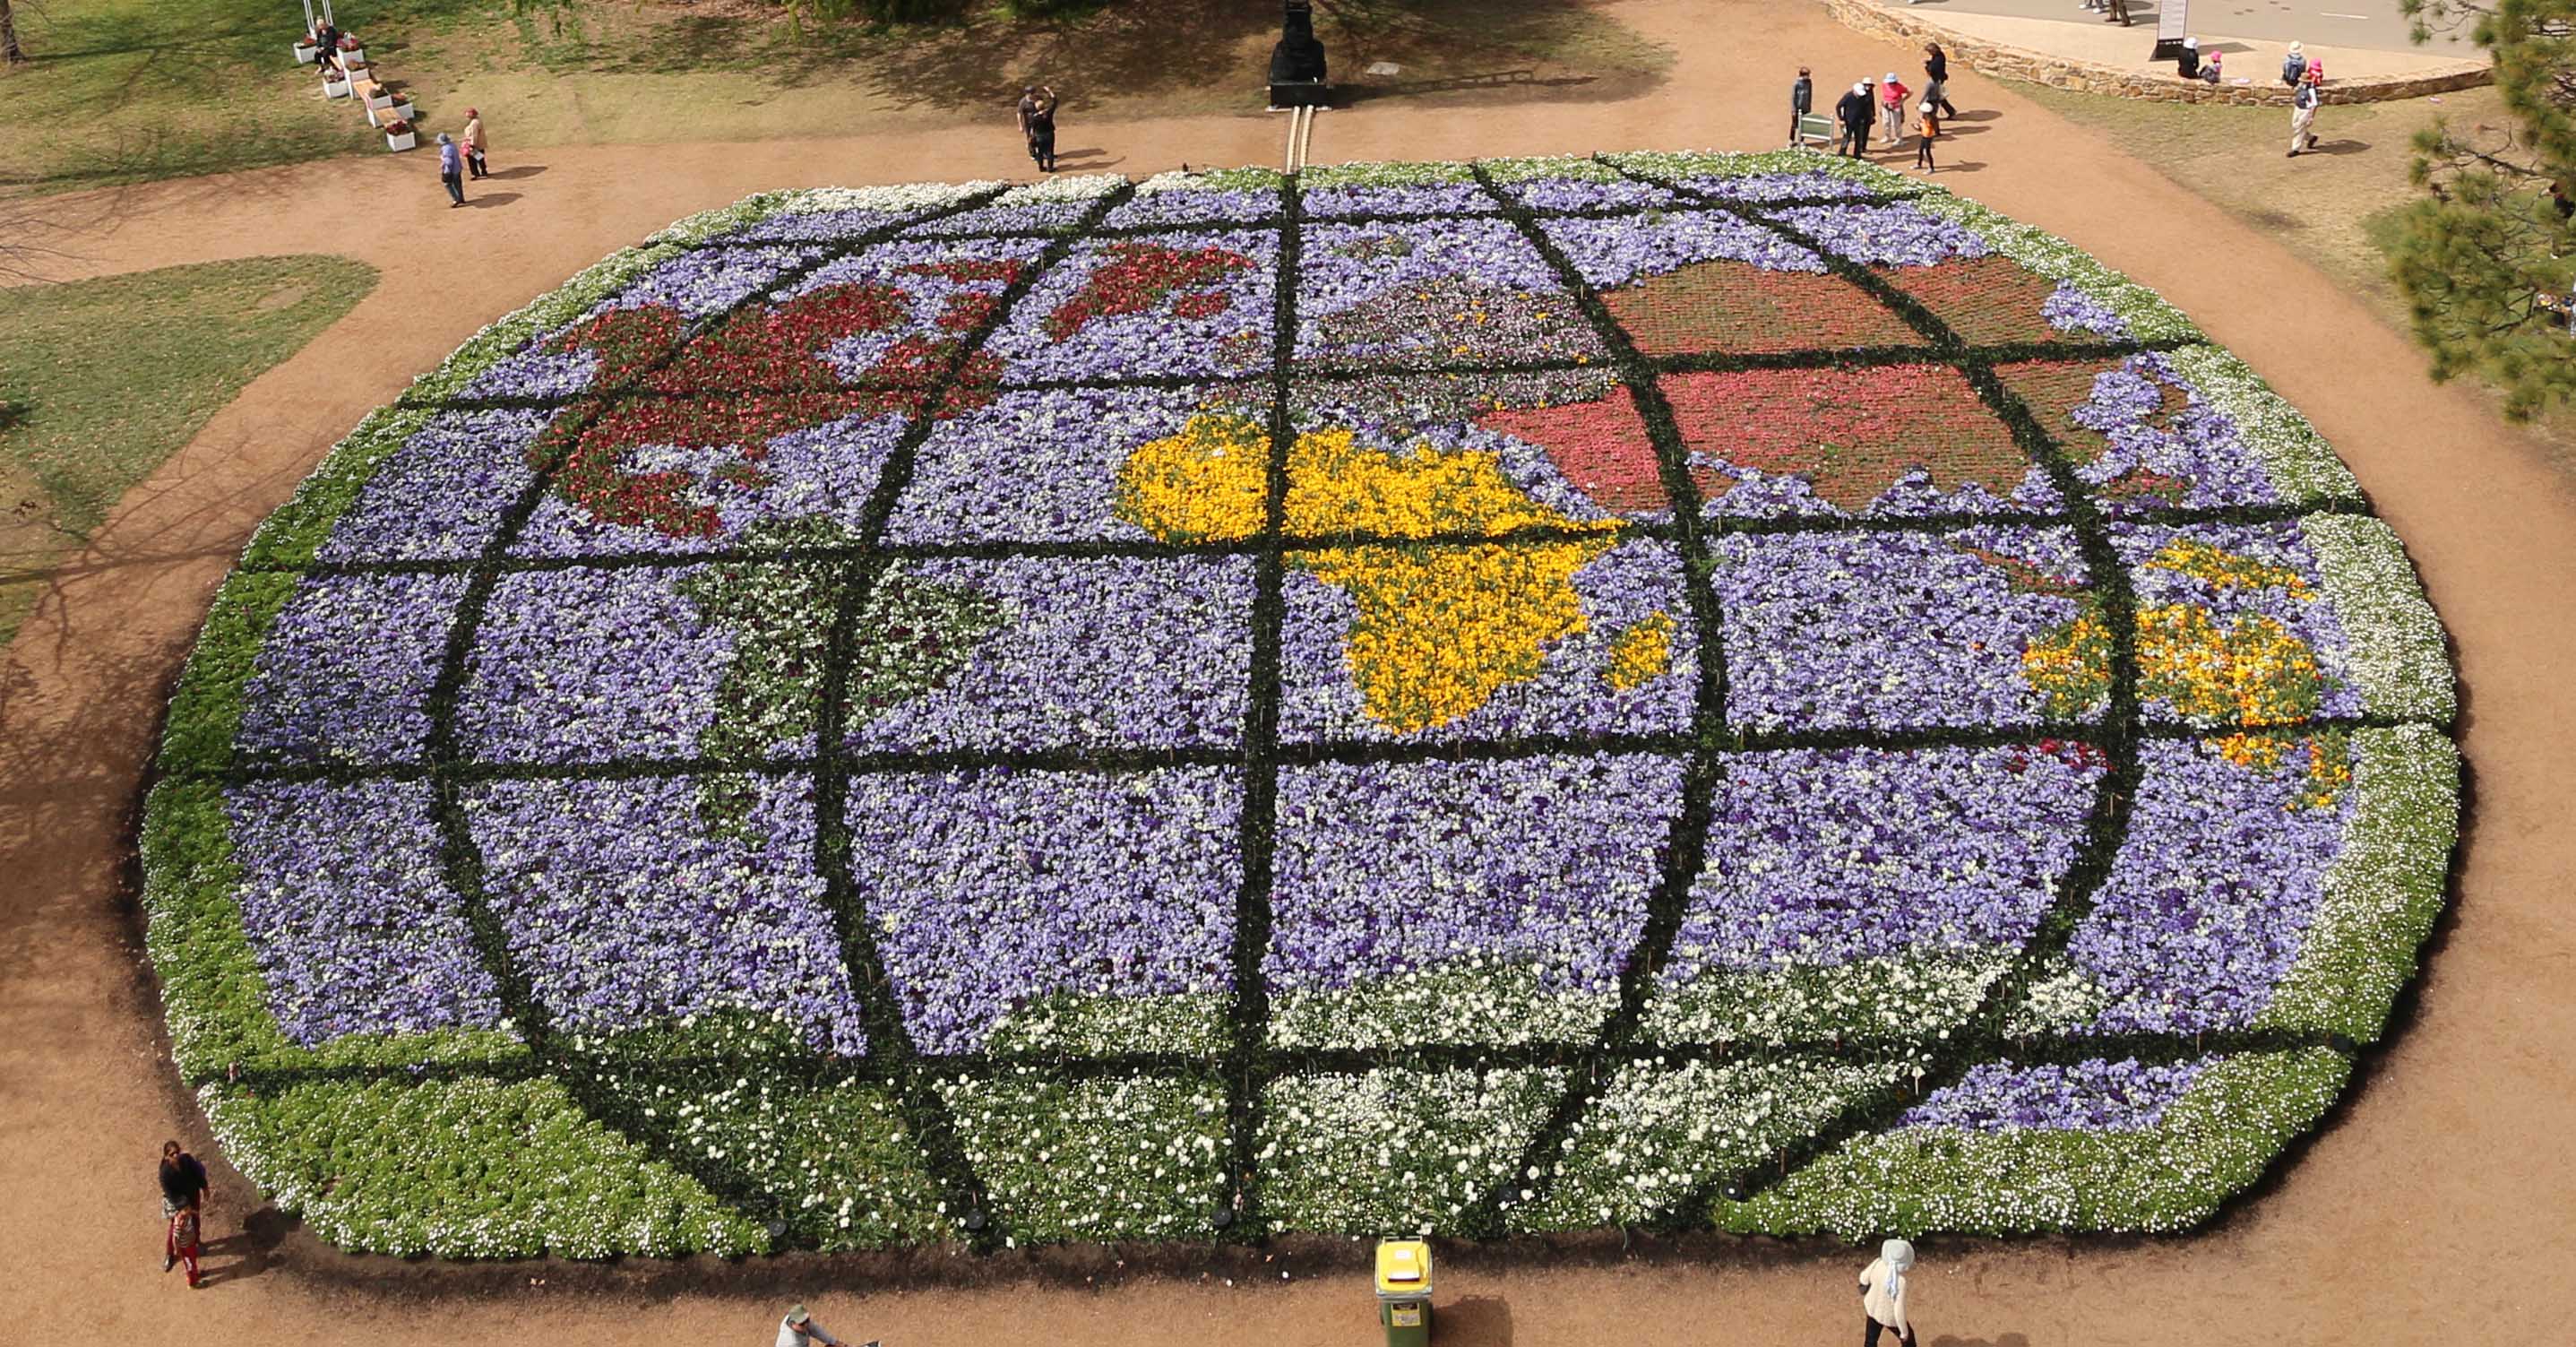 World Map Display at Floriade, Canberra